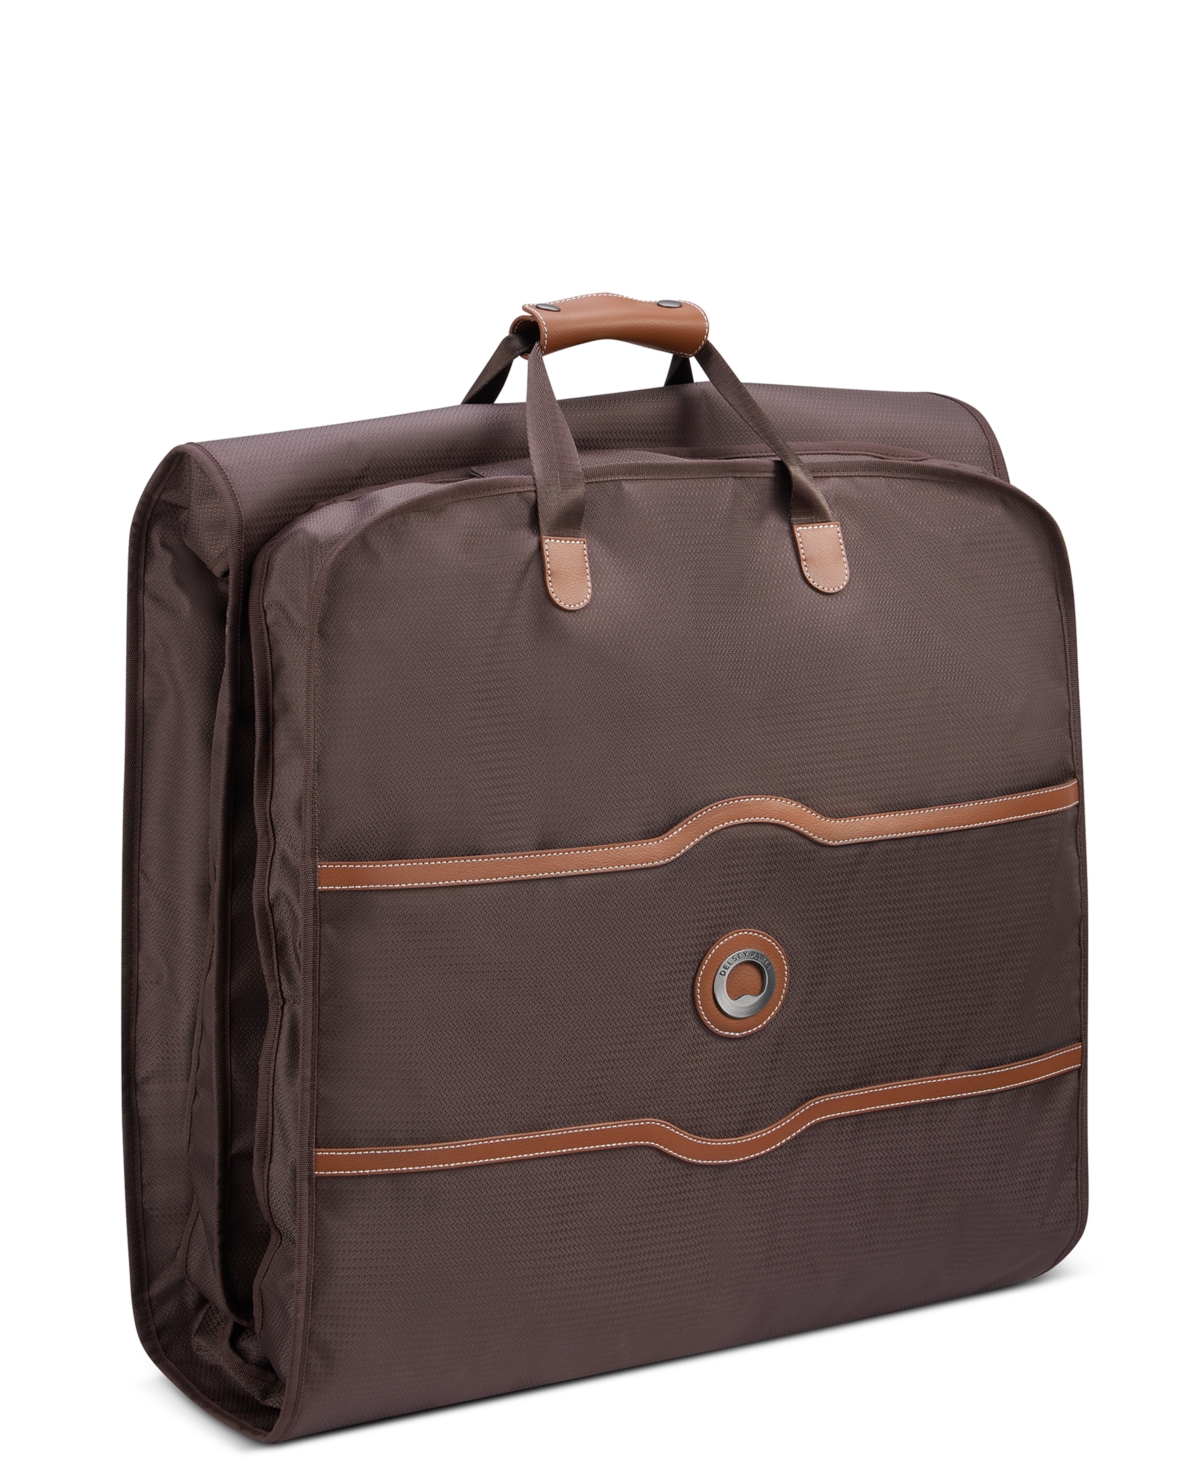 Delsey Chatelet Air 2.0 Garment Cover In Chocolate